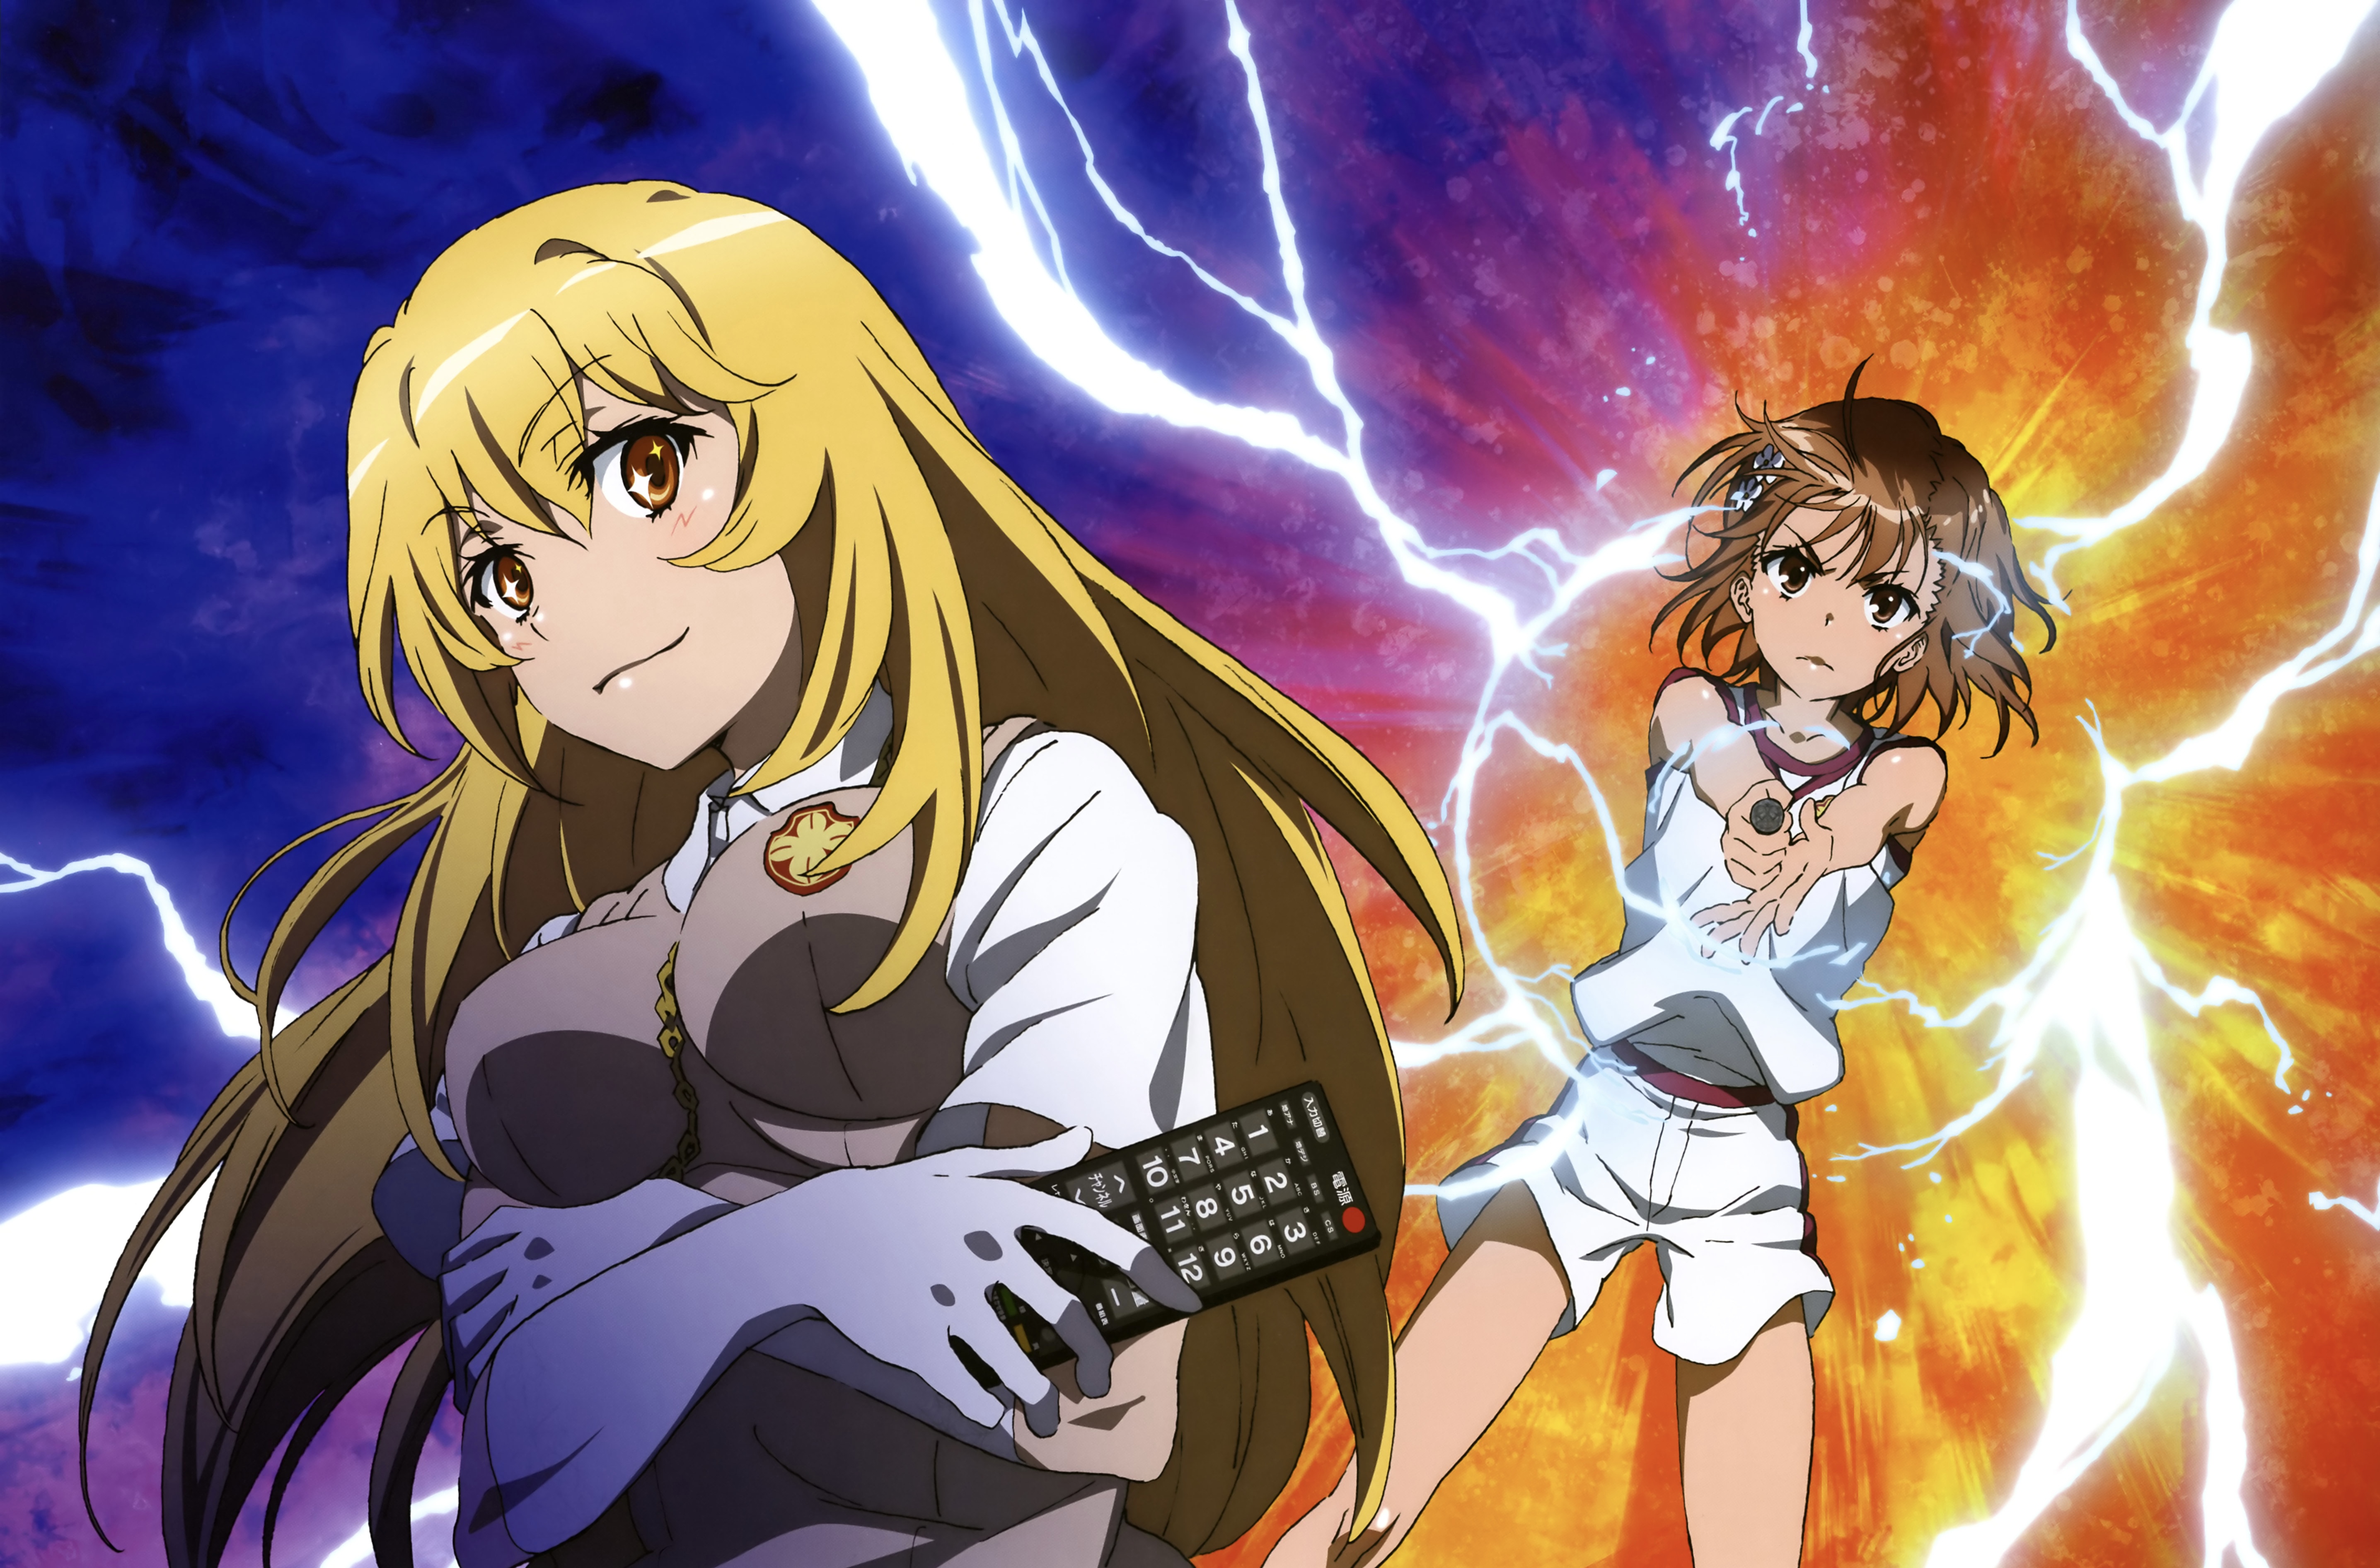 A Certain Magical Index 20212022 AnimeManga Calendar with Big Size   High Quality Images by Don Cheadle  Goodreads